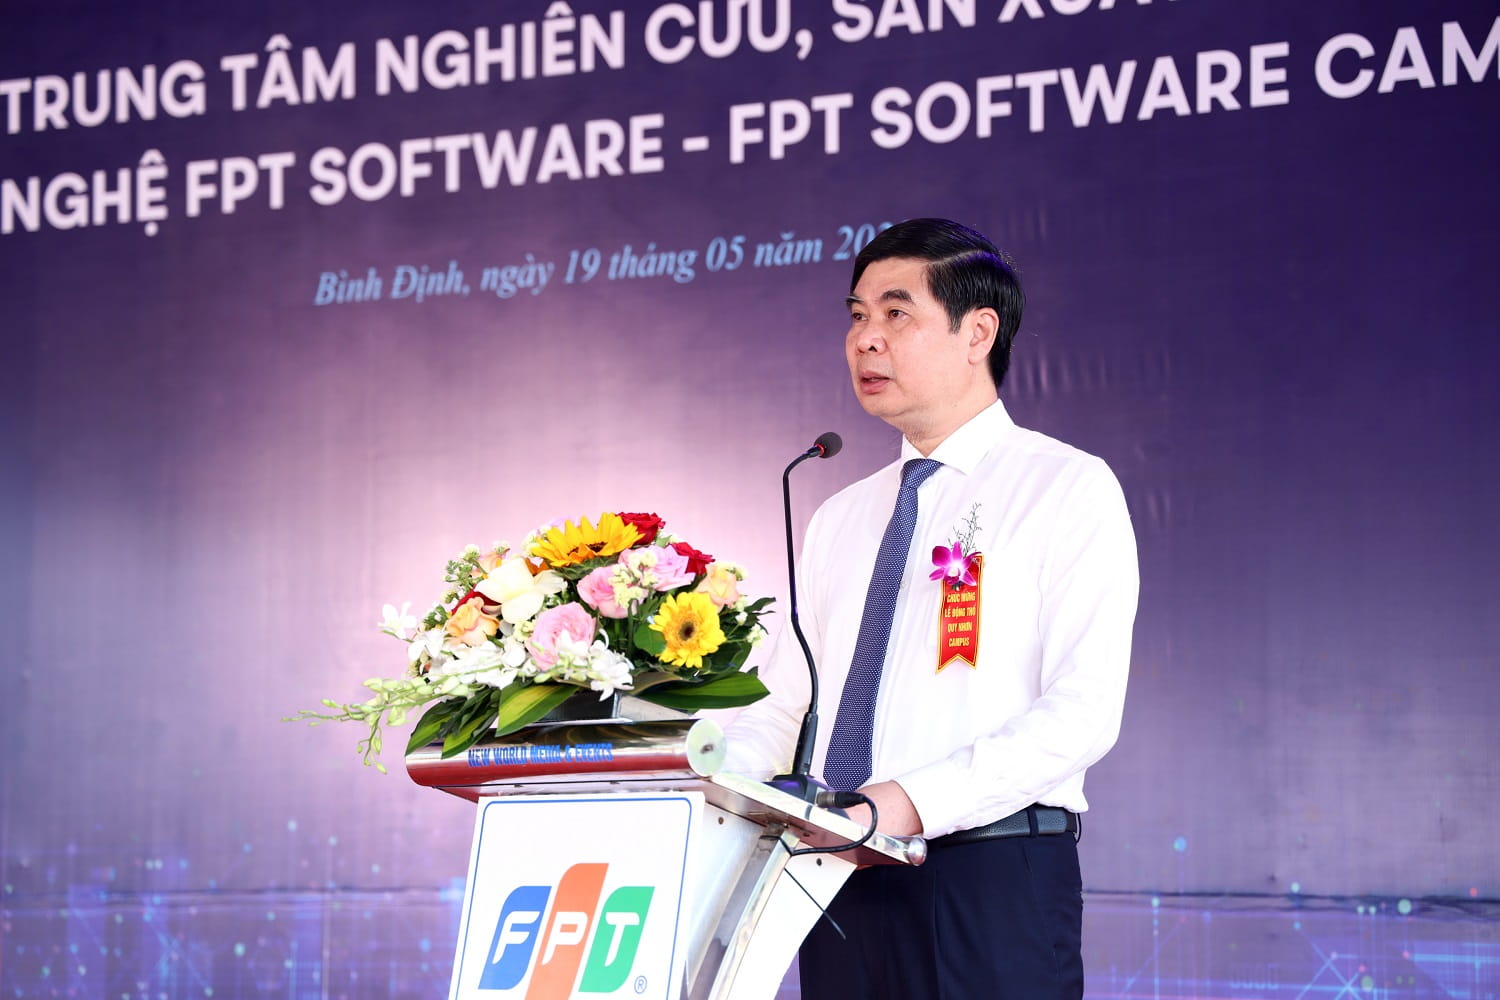 Mr. Lam Hai Giang, Provincial Party Committee Member, the Vice Chairman of the People's Committee, made a speech at the event.